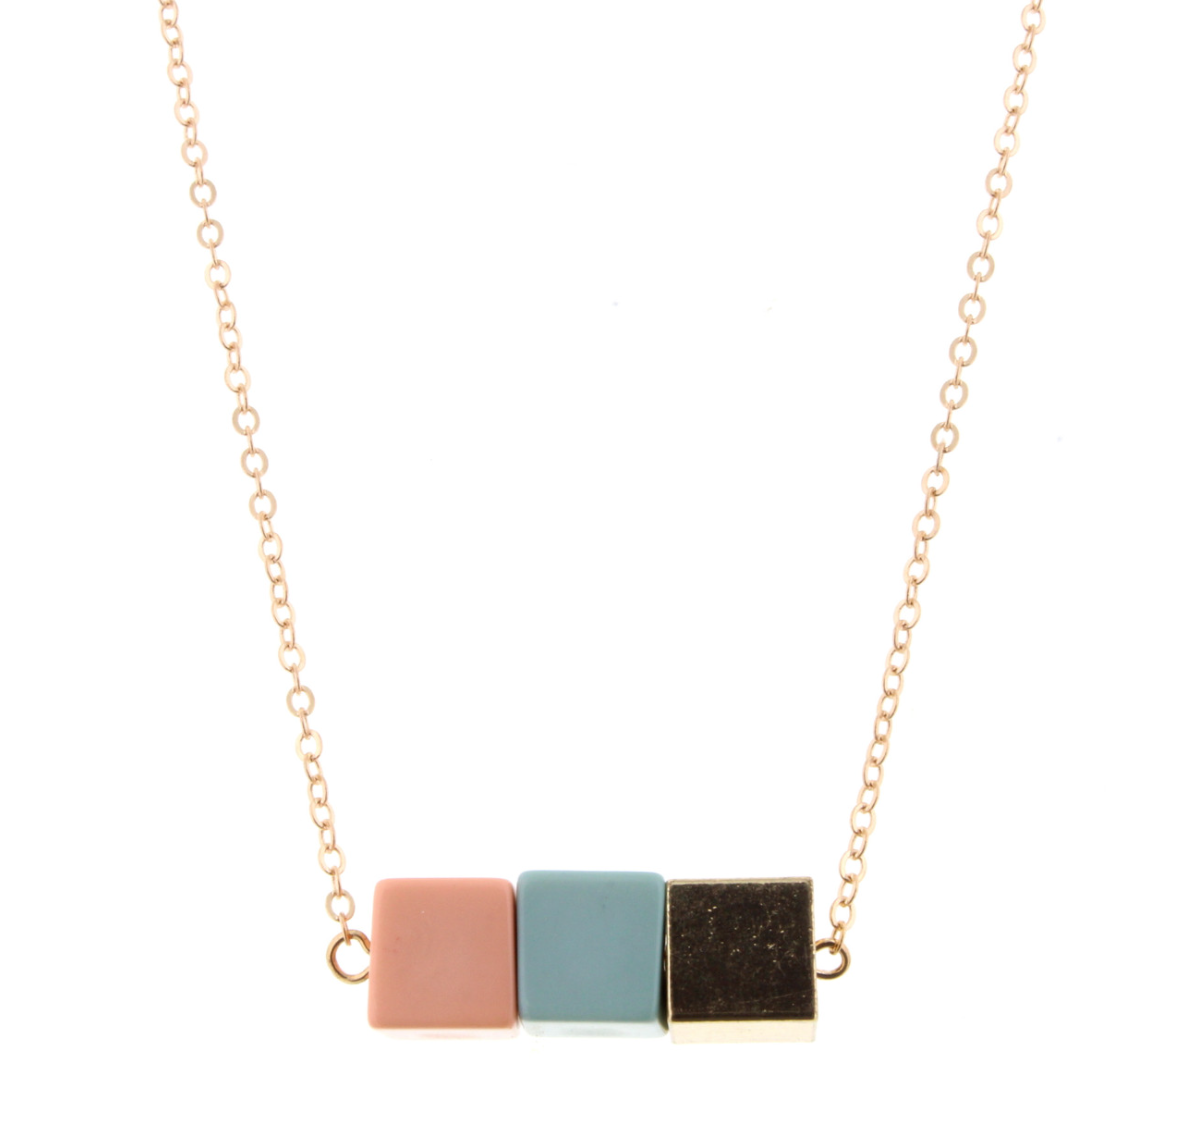 Jane Marie Shapin' Up Color Block Necklaces